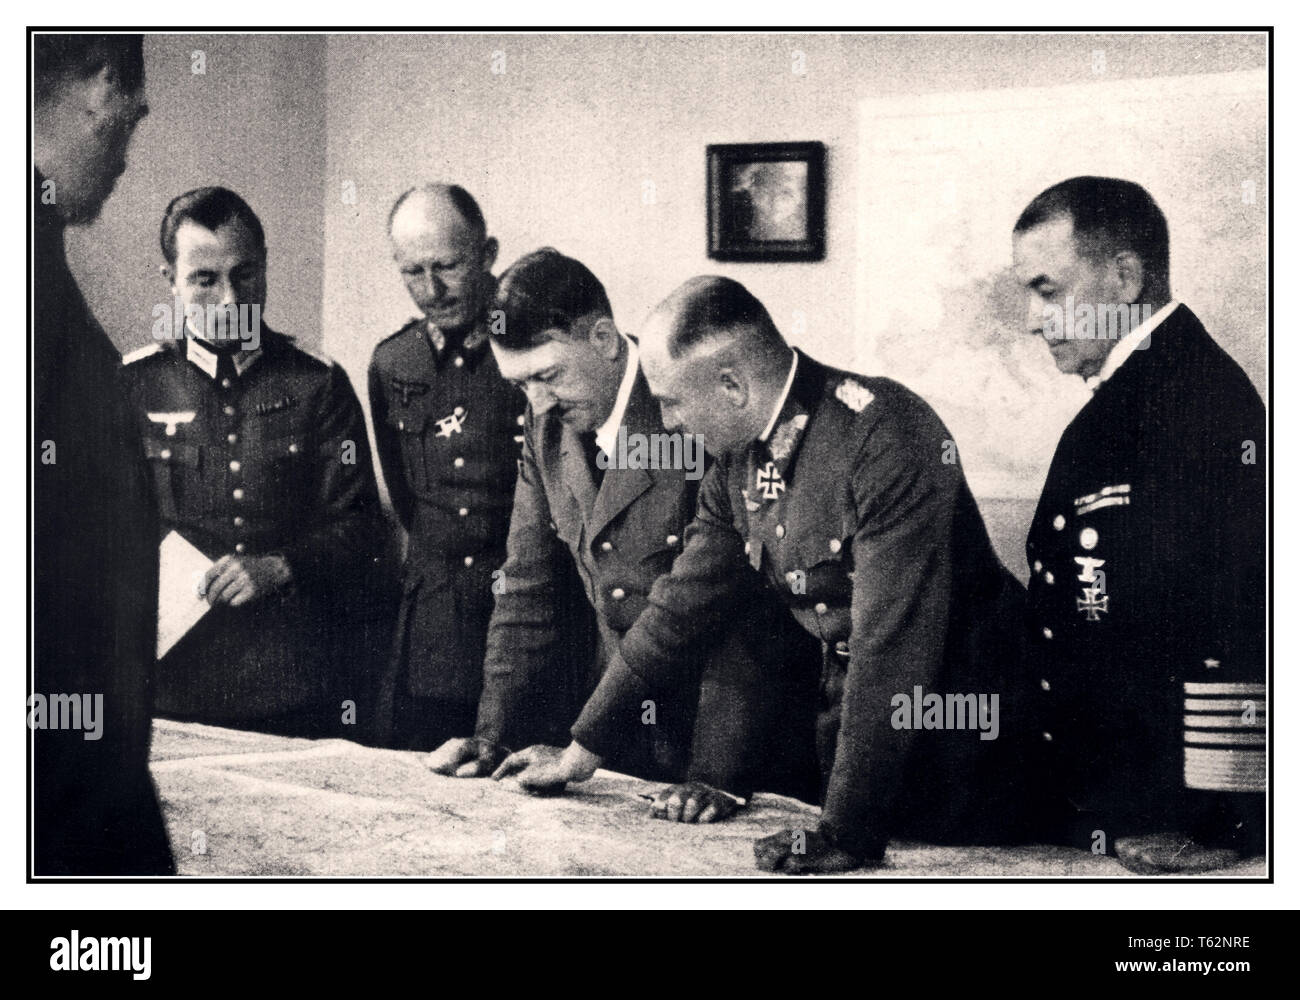 Adolf Hitler with battle maps at Bruly-de-Peche Ardennes WW2 command centre, As pictured to the left of Adolf Hitler is General Alfred Jodl, and on the right Field Marshal Walter von Brauchitsch, commander-in-chief of the army. Next to him Admiral of the Fleet Dr Erich Raeder. 1944 Stock Photo